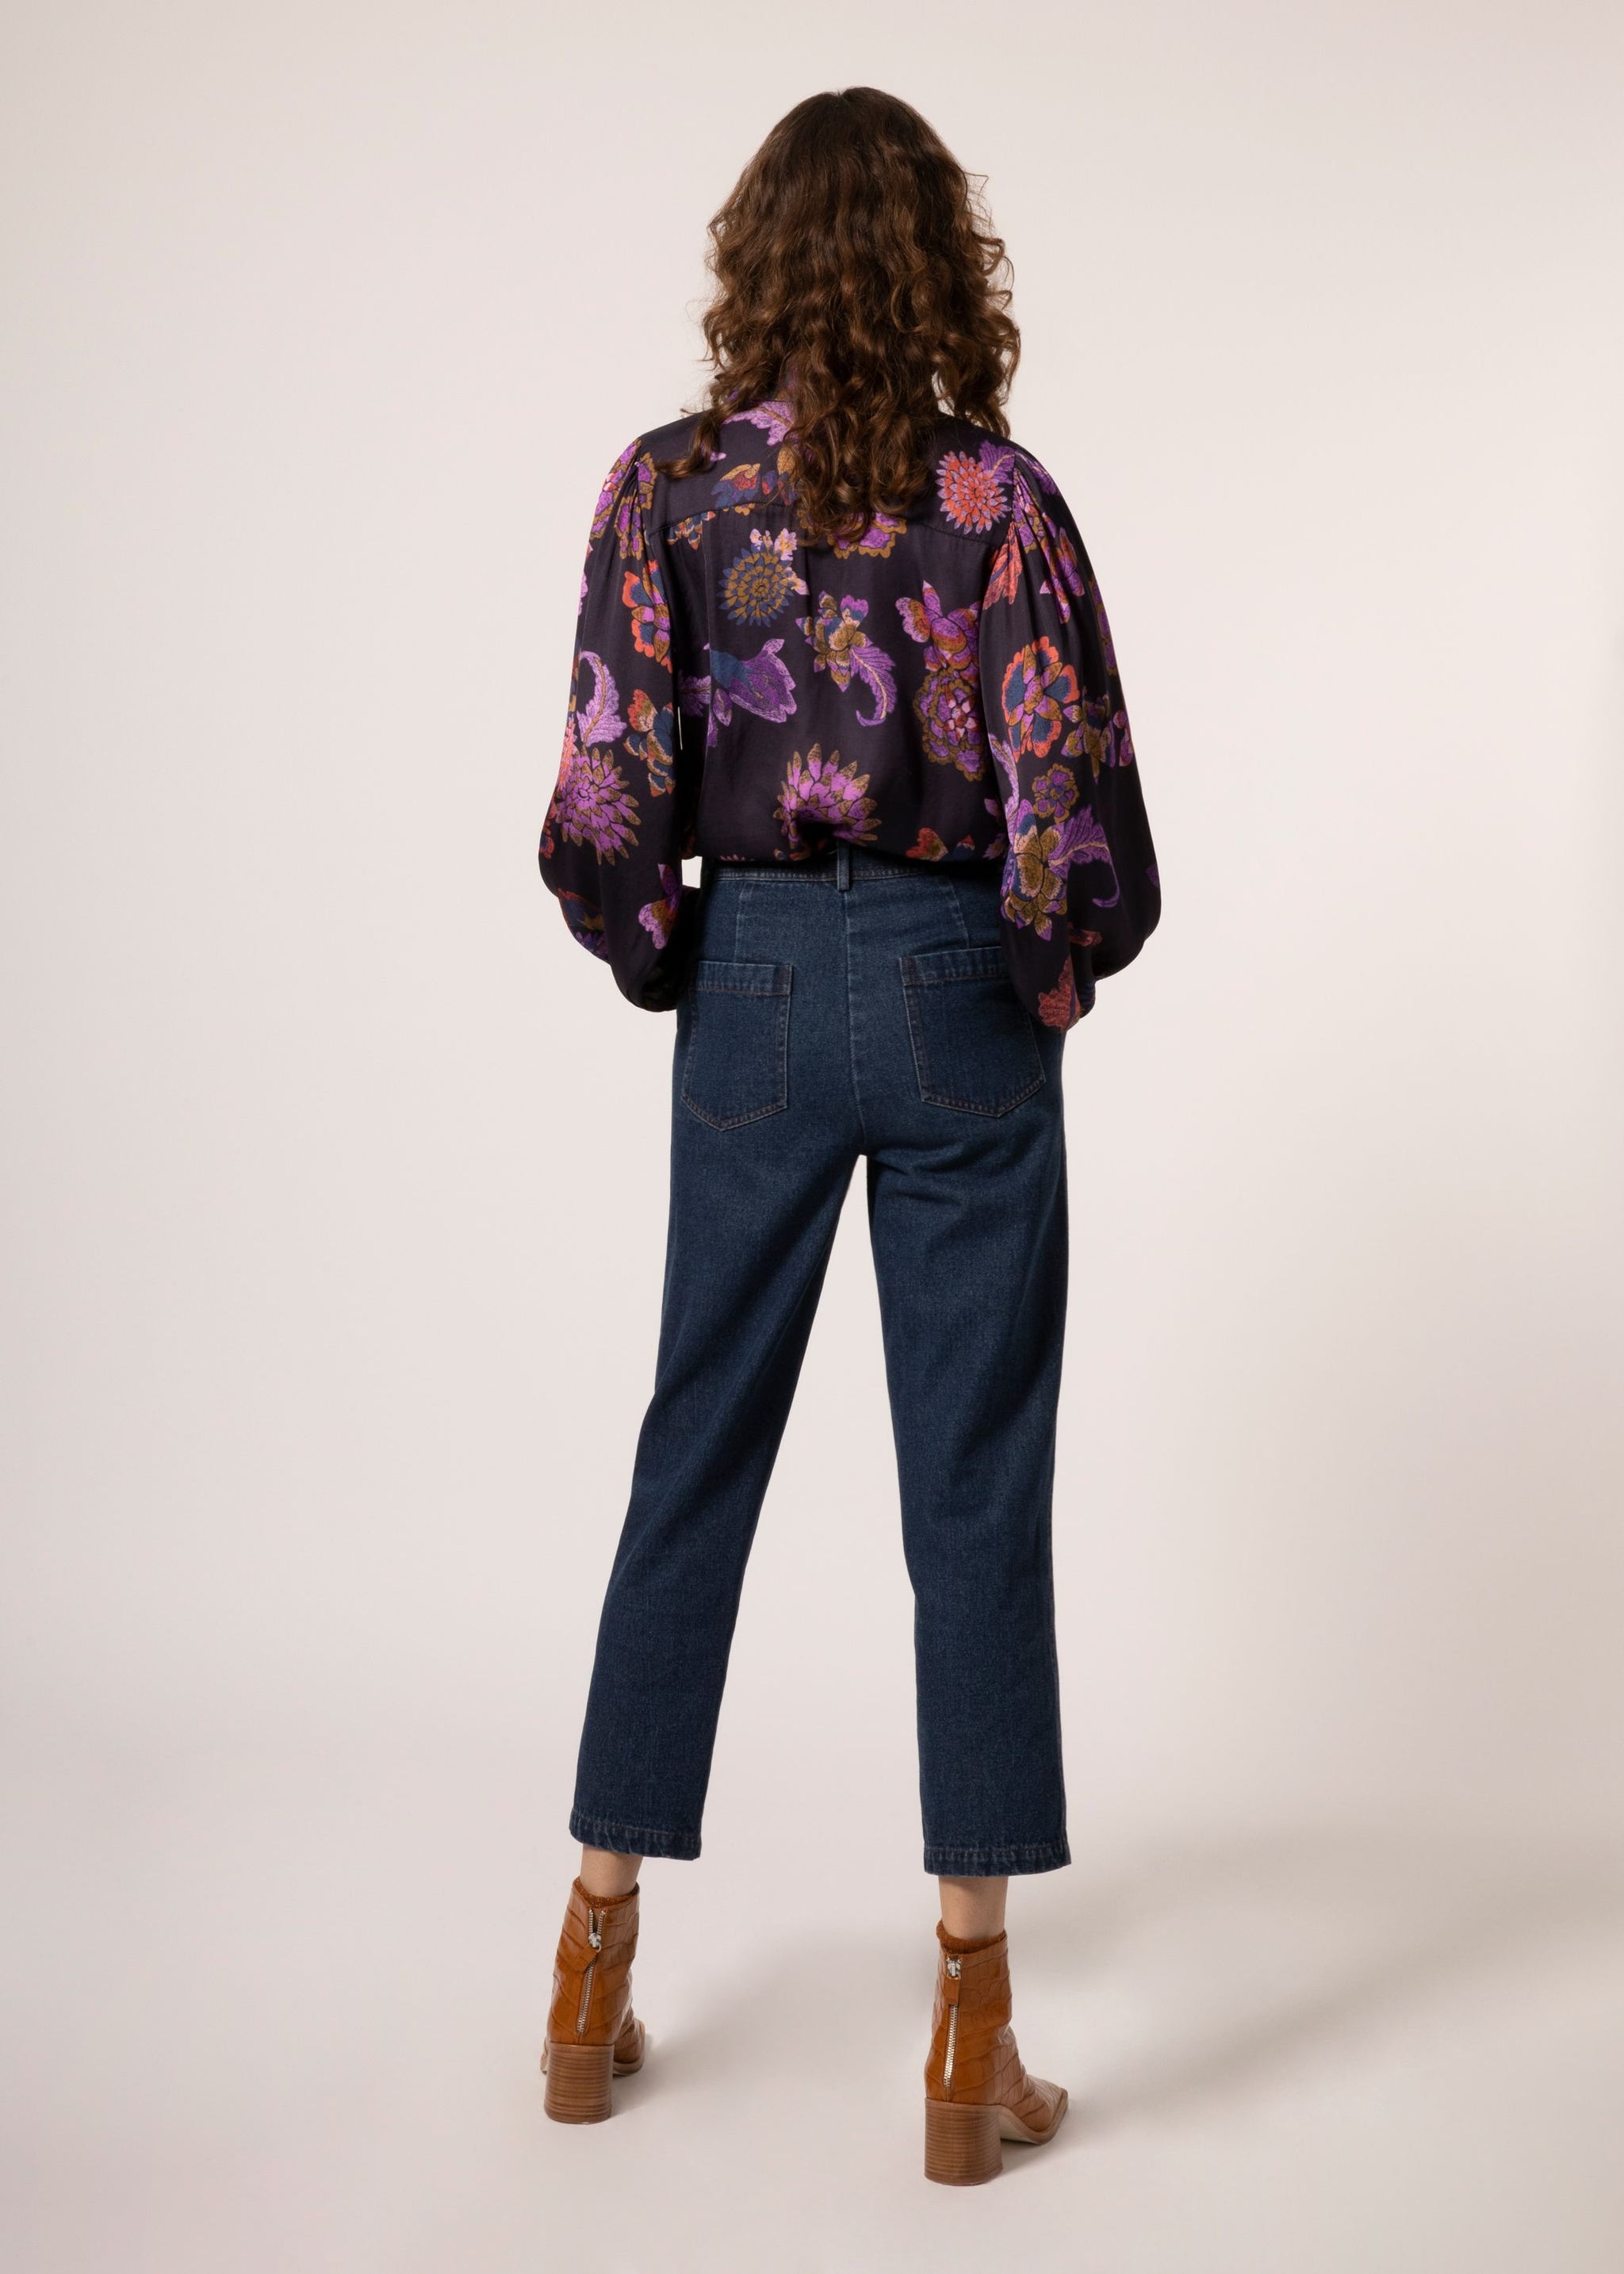 FRNCH Camassia Purple Floral Top